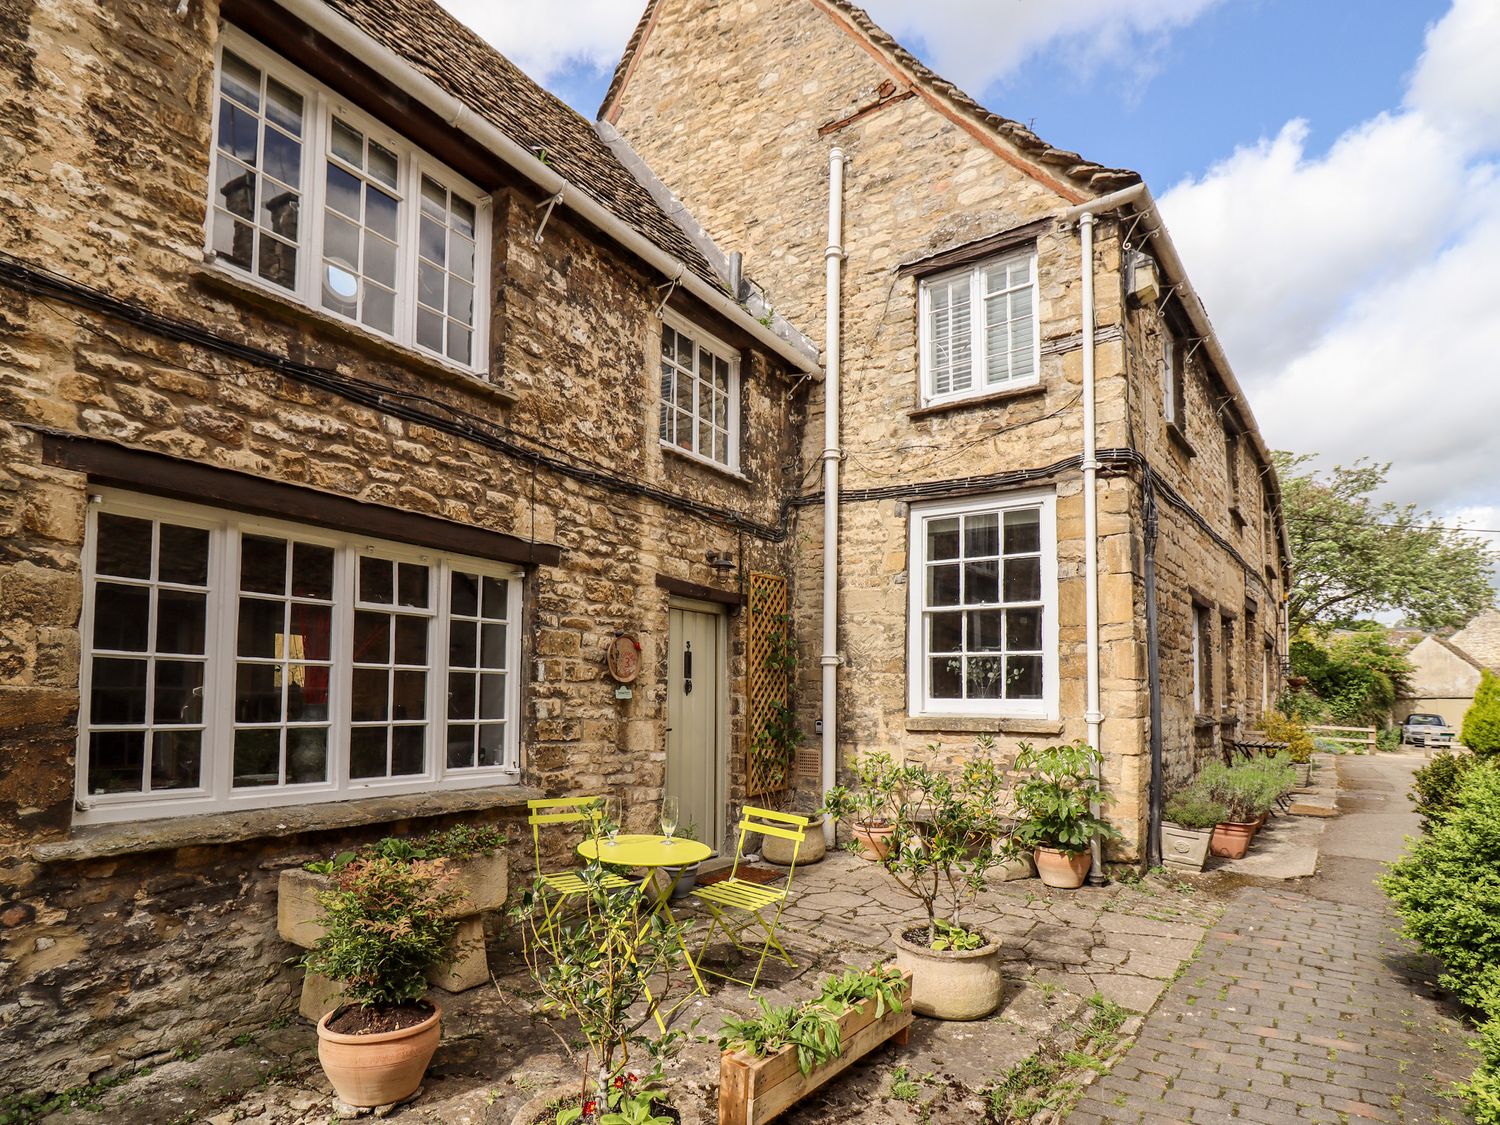 3 George Yard - Cotswolds - 1068448 - photo 1